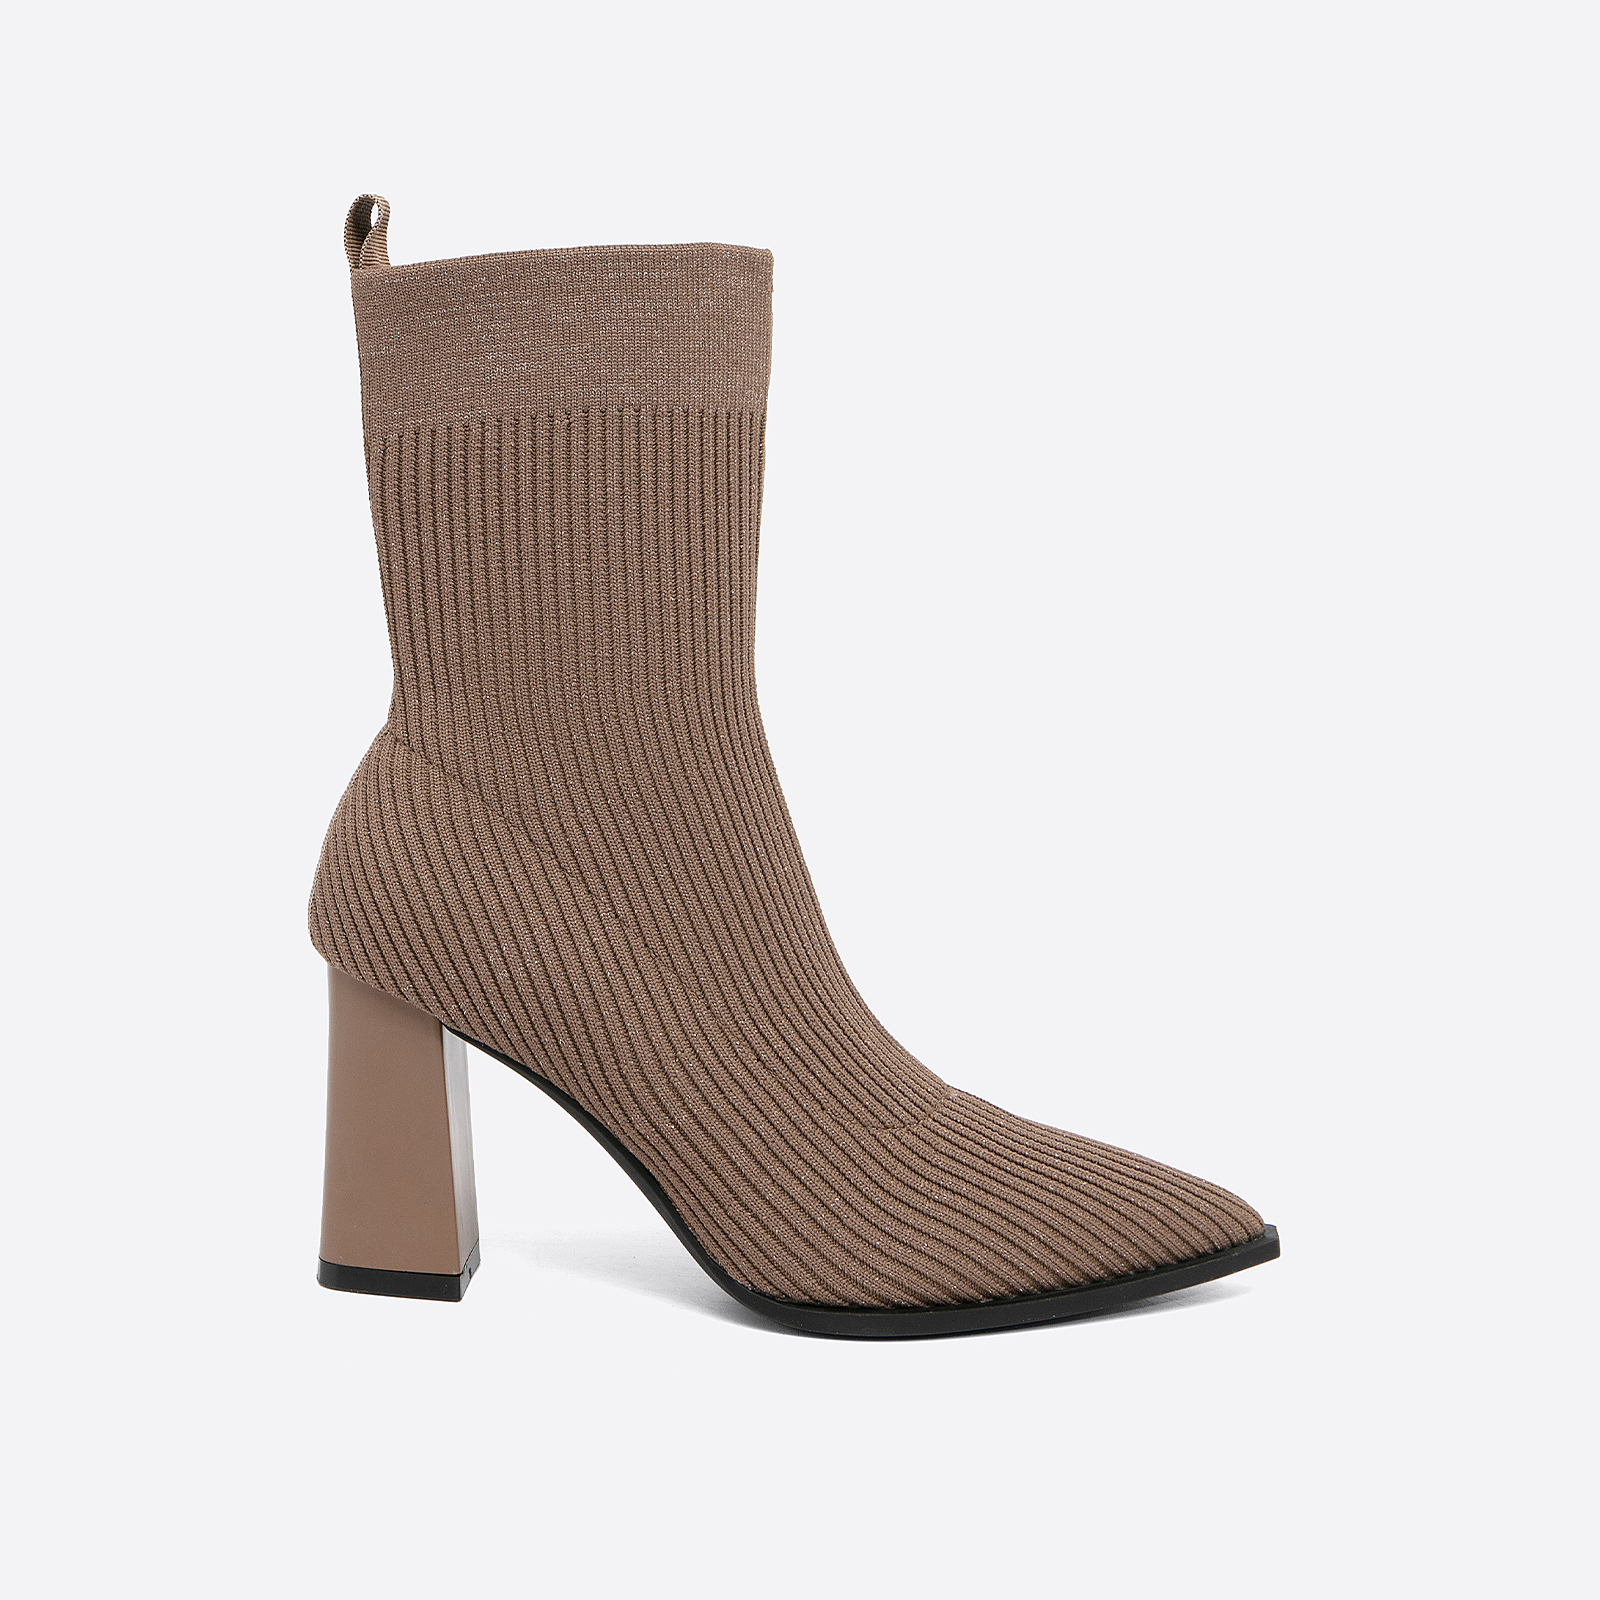 MOUSSE FIT Knit Chunky Heeled Ankle Boots